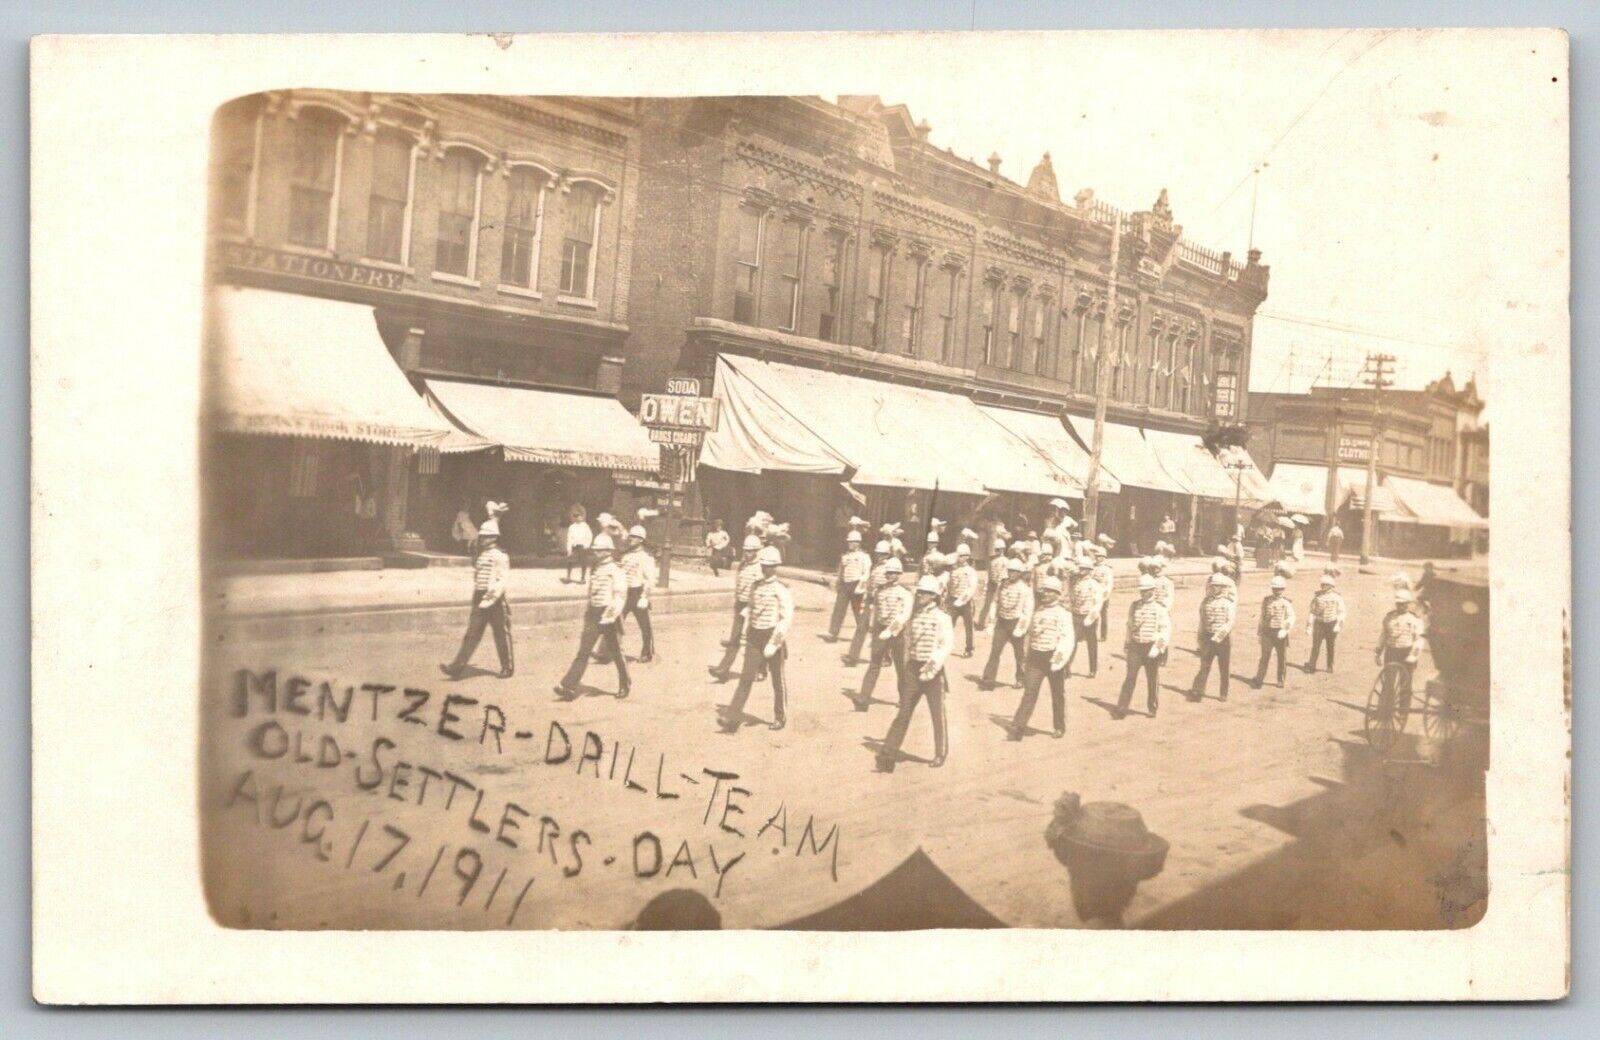 Marion Iowa~Mentzer Drill Team~Old Settlers Day Parade~Owen Drug Store~1911 RPPC